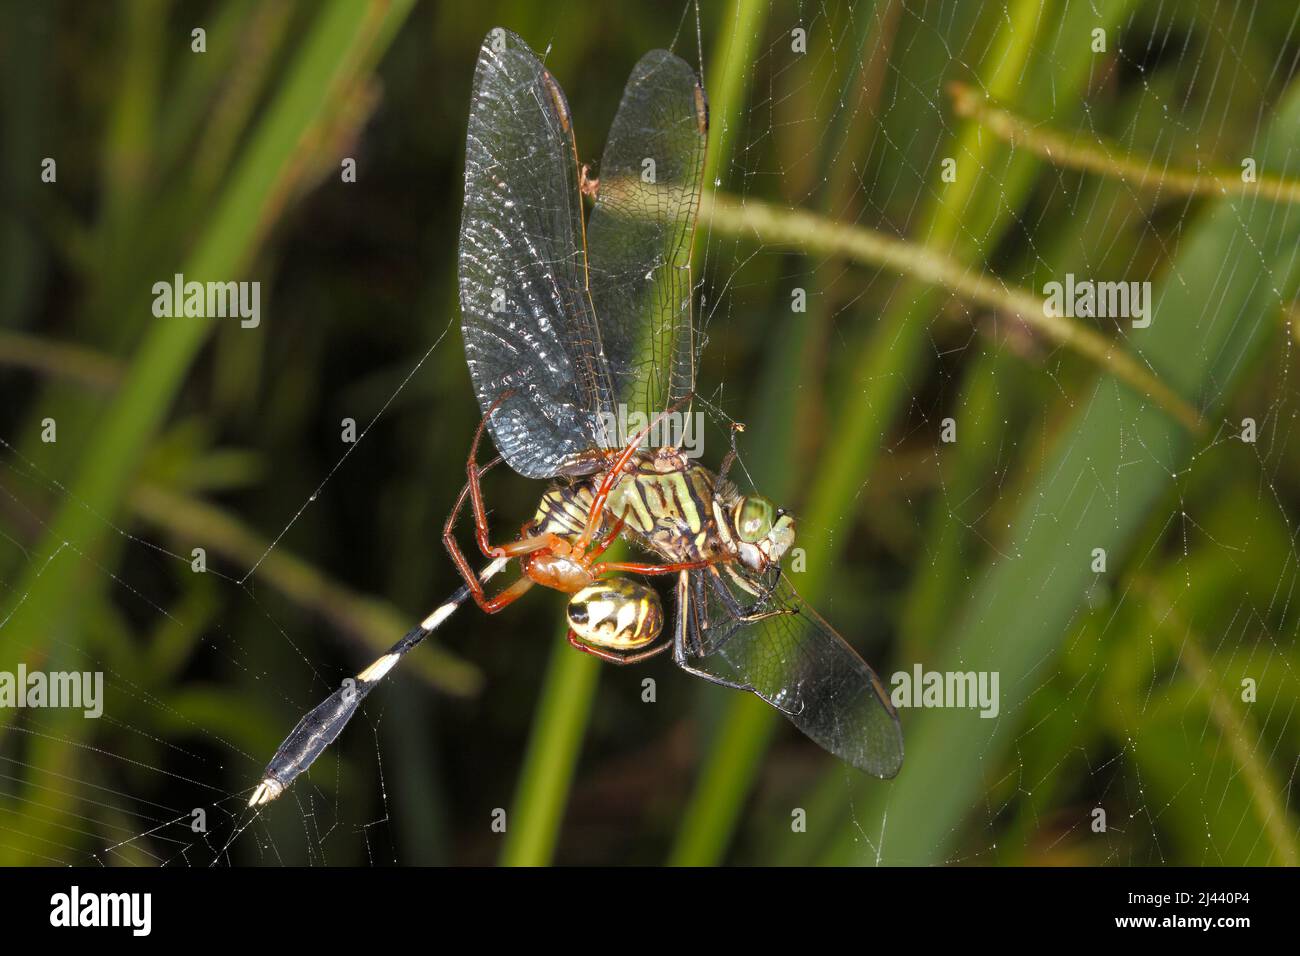 Leaf Curling Spider, Phonognatha graeffei, in web and eating prey of Slender Skimmer Dragonfly, Orthetrum sabina. Coffs Harbour, NSW, Australia Stock Photo